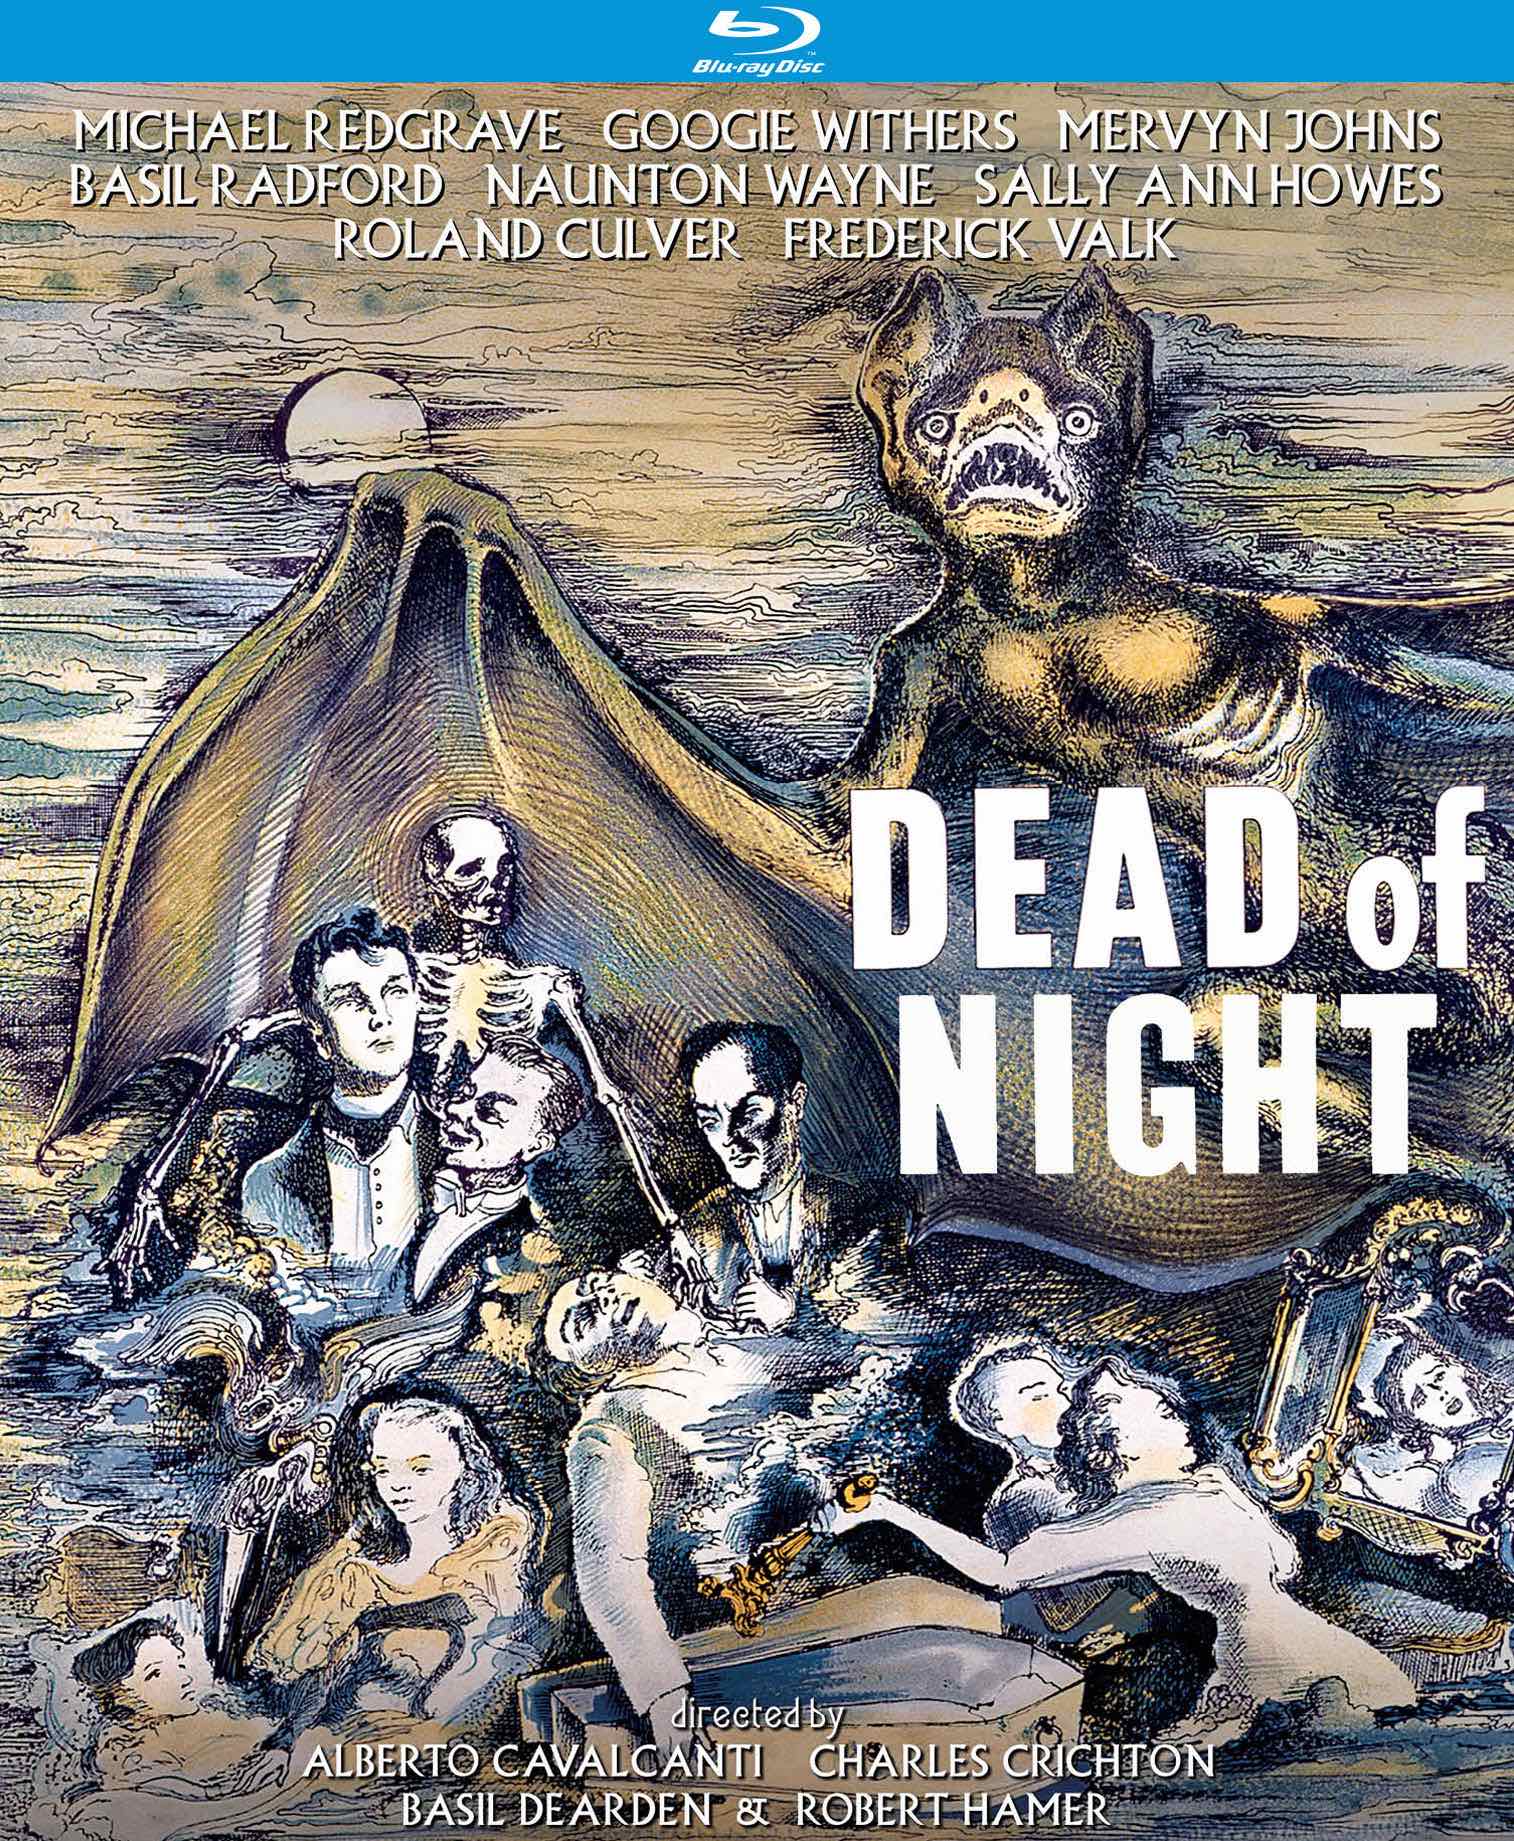 Dead of Night [Blu-ray] cover art